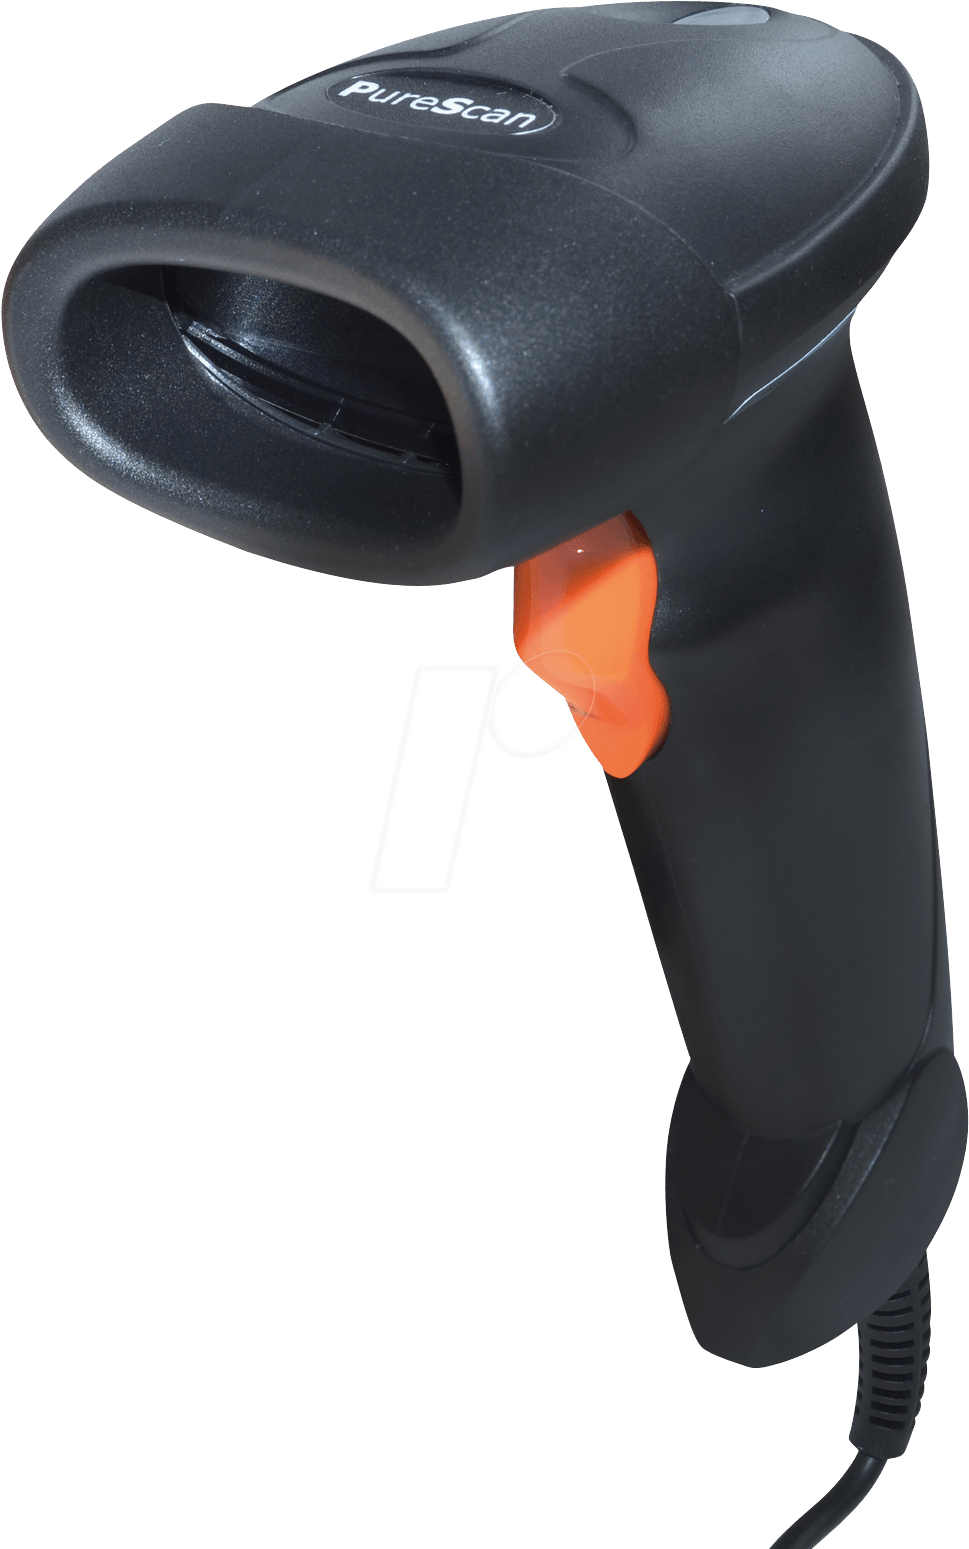 A Close Up Of A Barcode Scanner